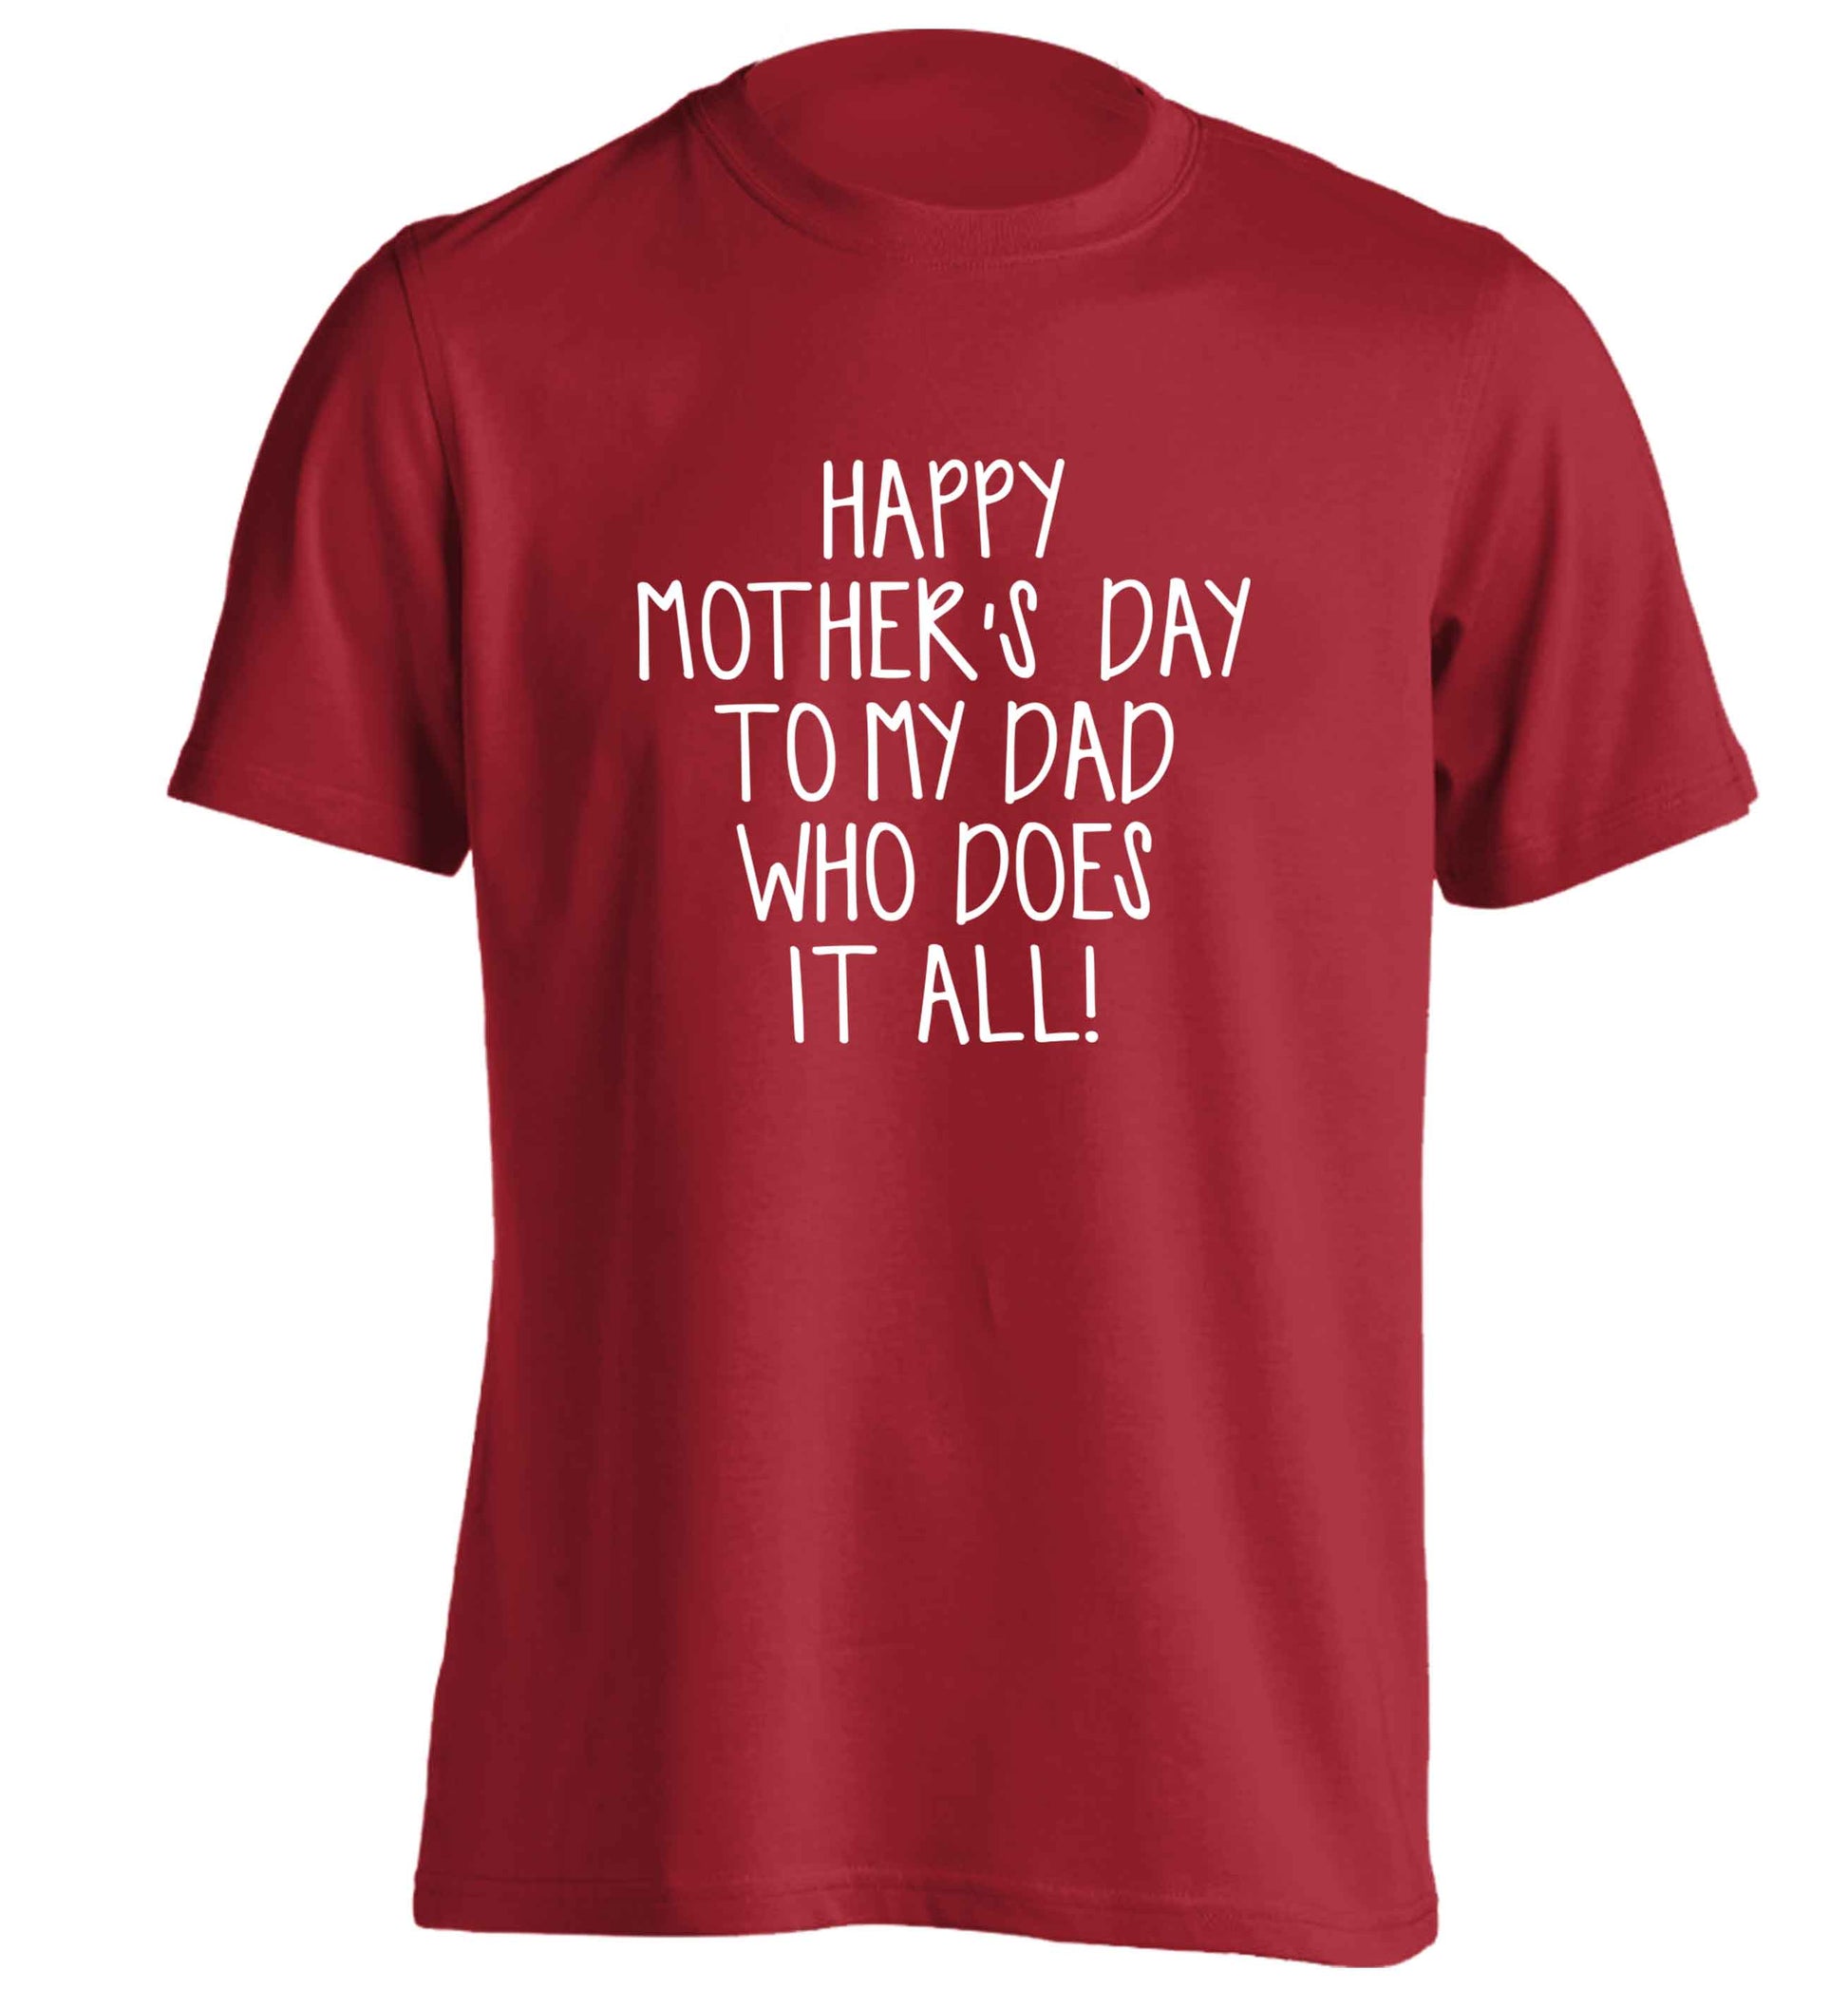 Happy mother's day to my dad who does it all! adults unisex red Tshirt 2XL